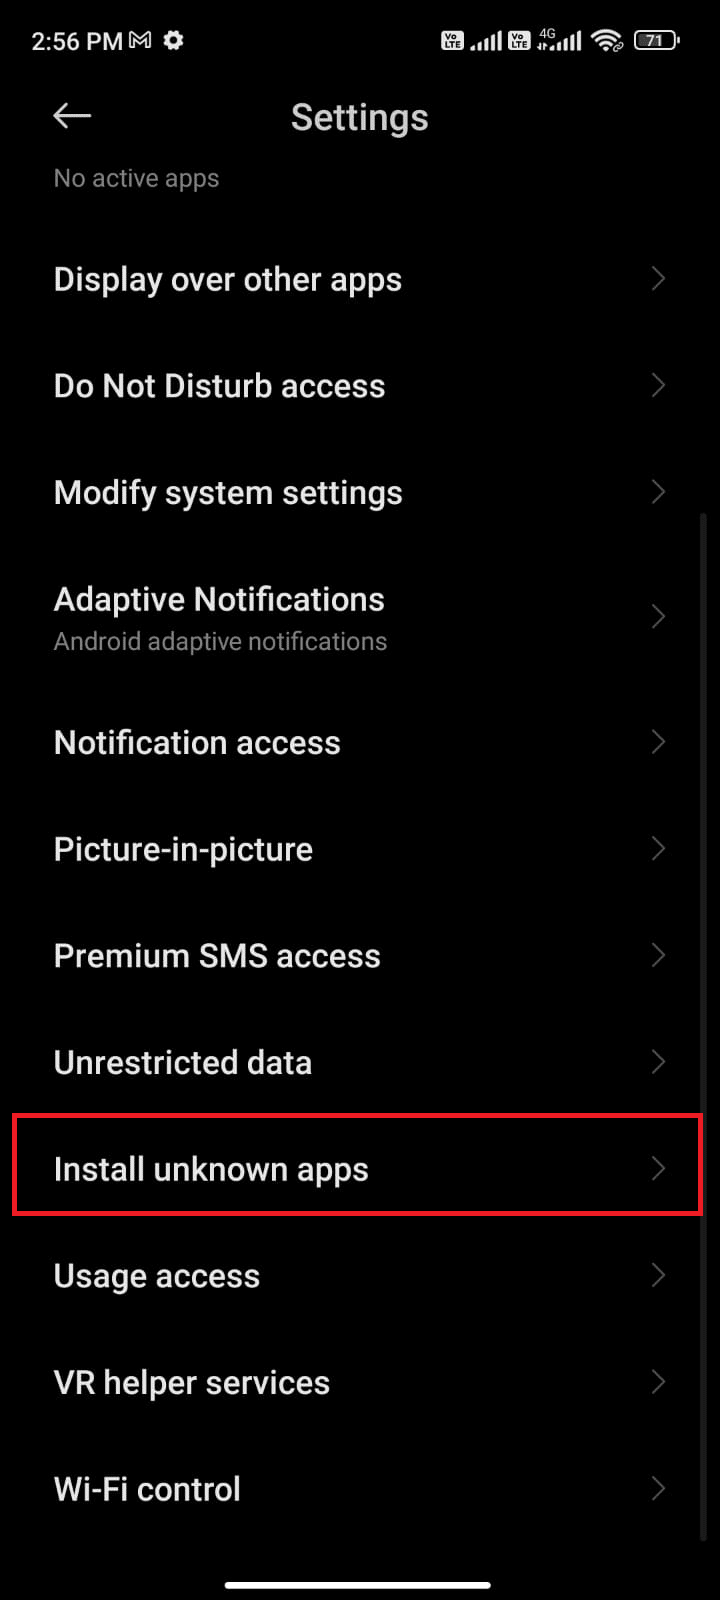 tap the Install unknown apps setting from the list